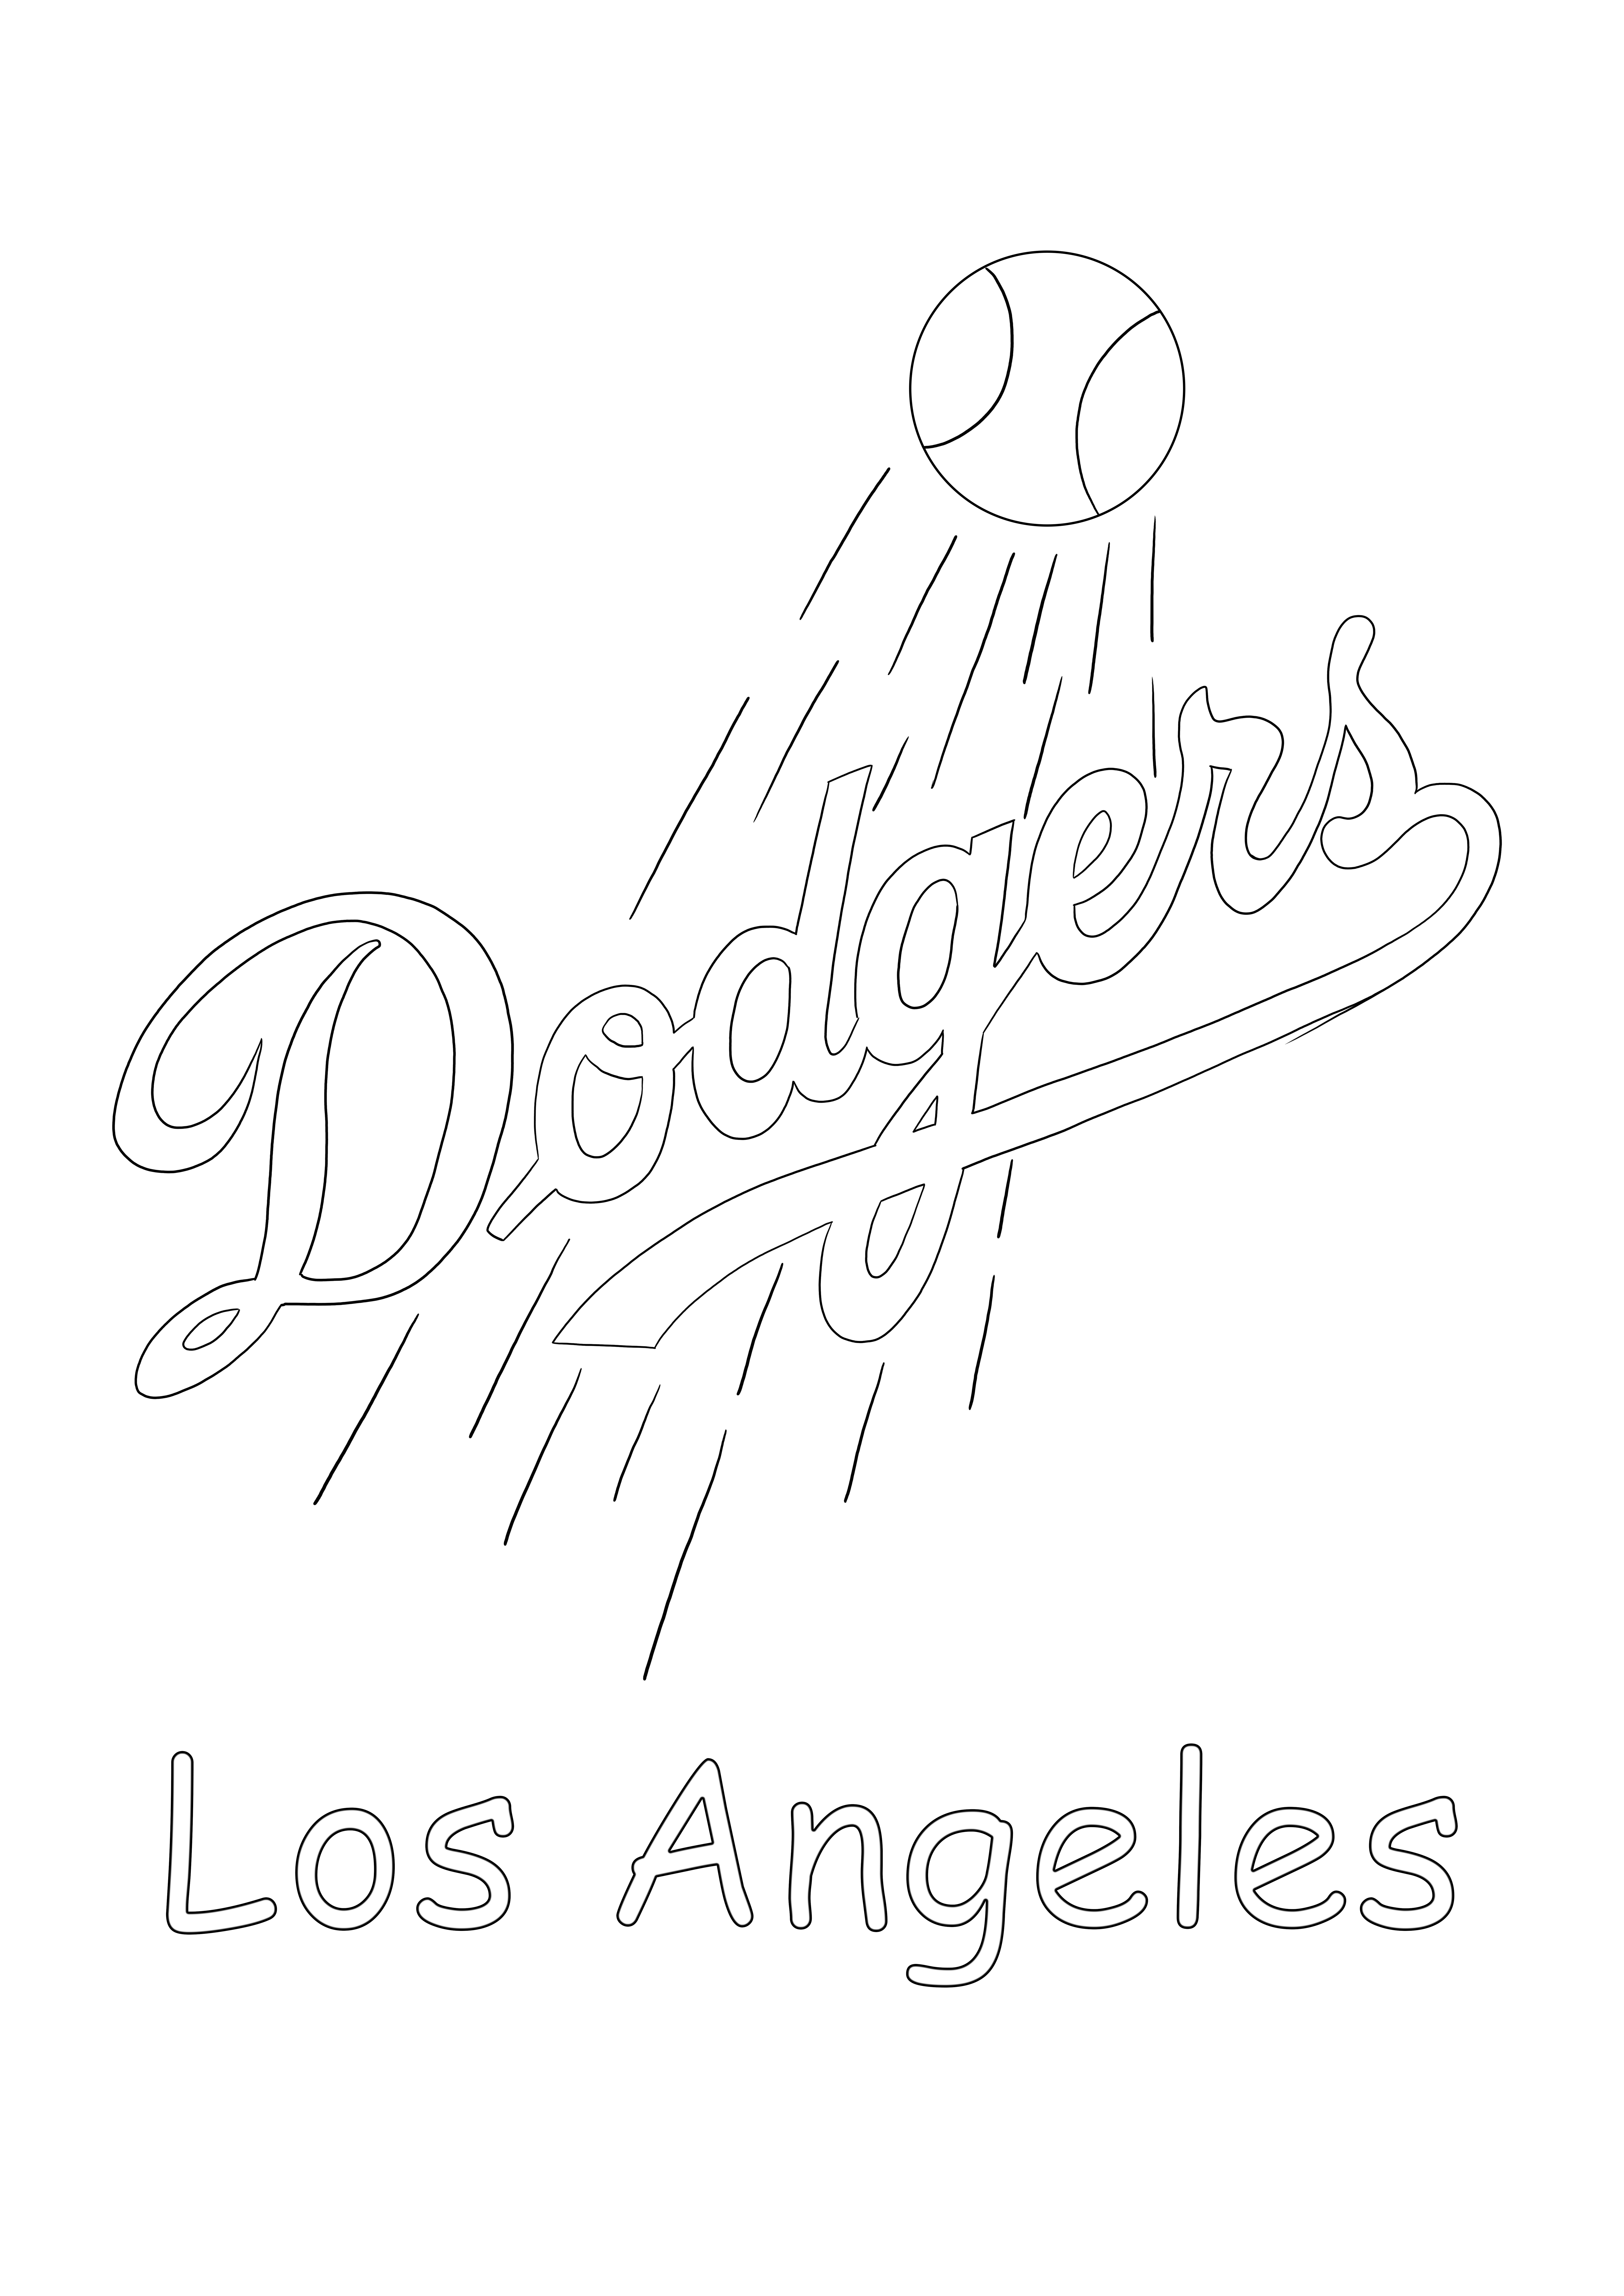 Los Angeles Dodgers logo free to print and color for all MLB fan